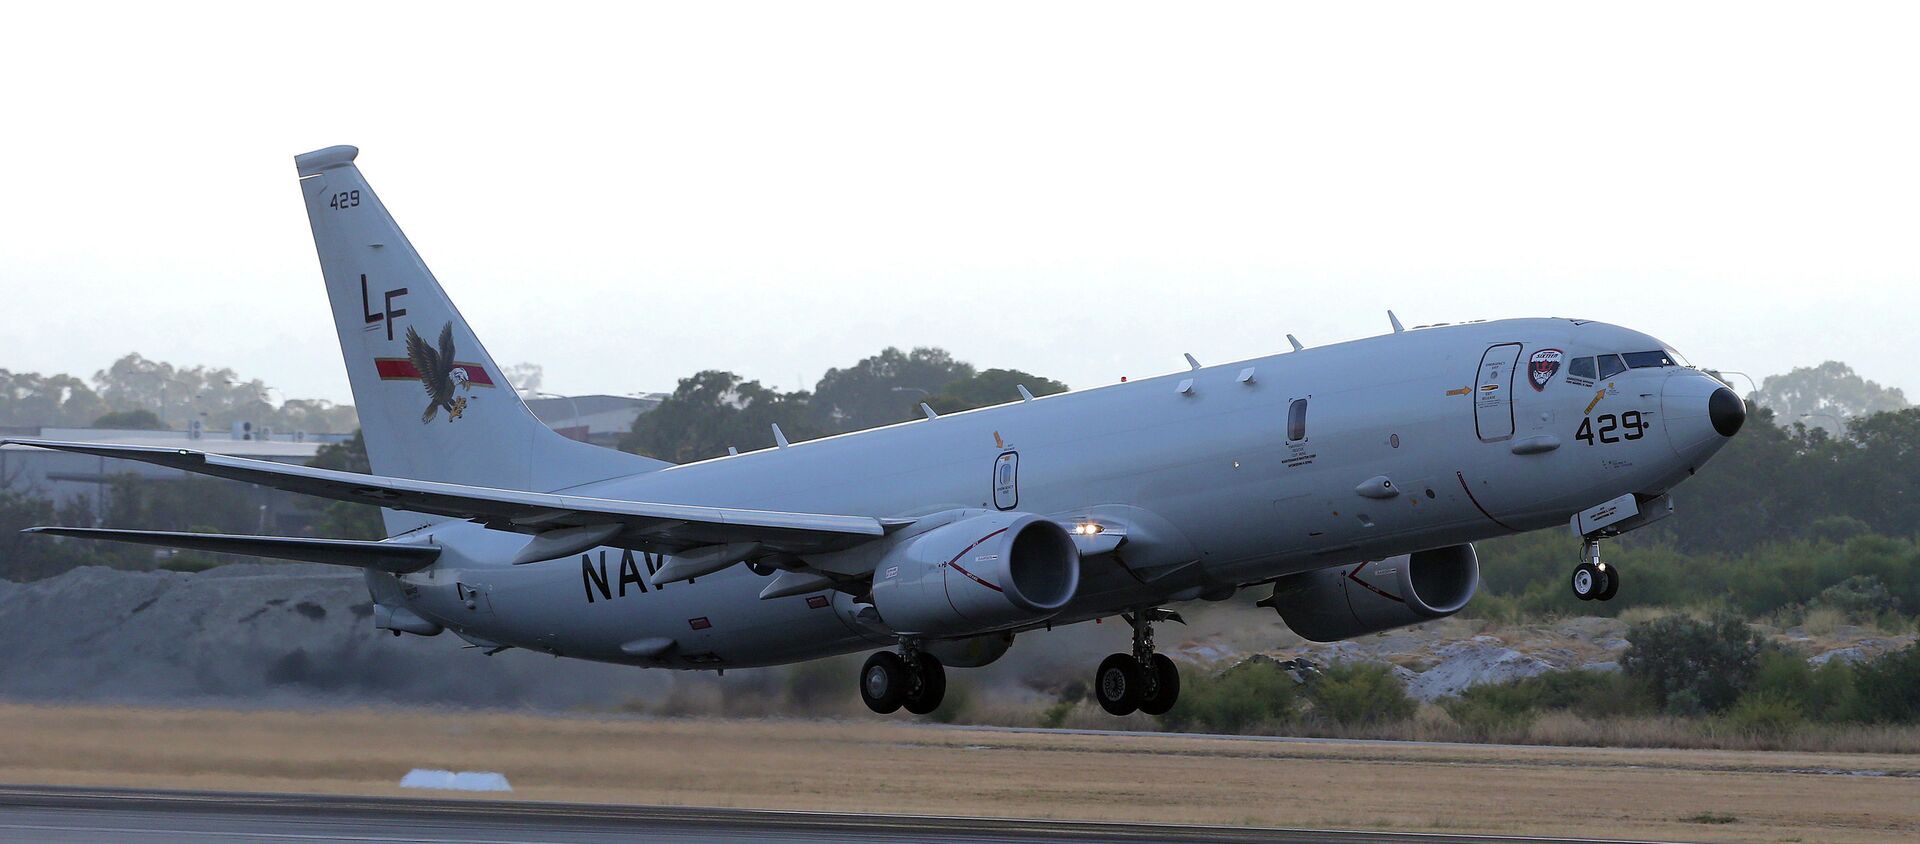 A US Navy P-8 Poseidon takes off from Perth Airport in 2014. - Sputnik International, 1920, 03.06.2021